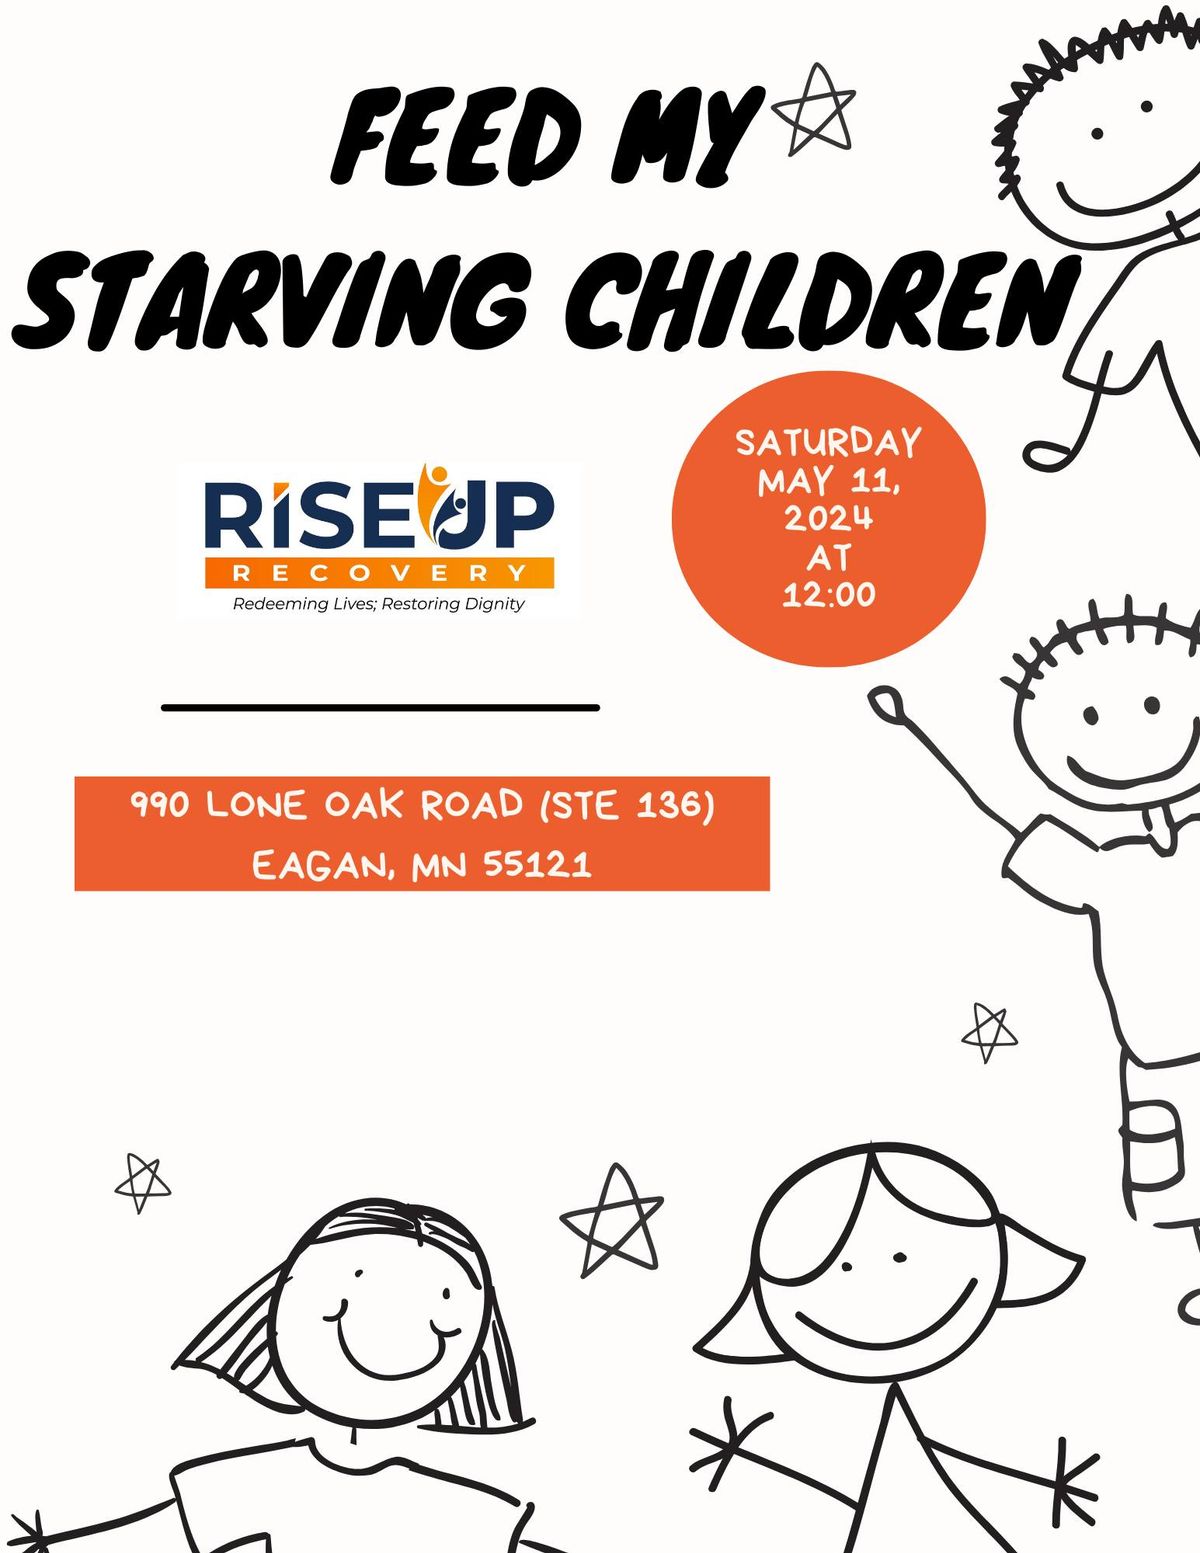 Feed My Starving Children with Rise Up Recovery